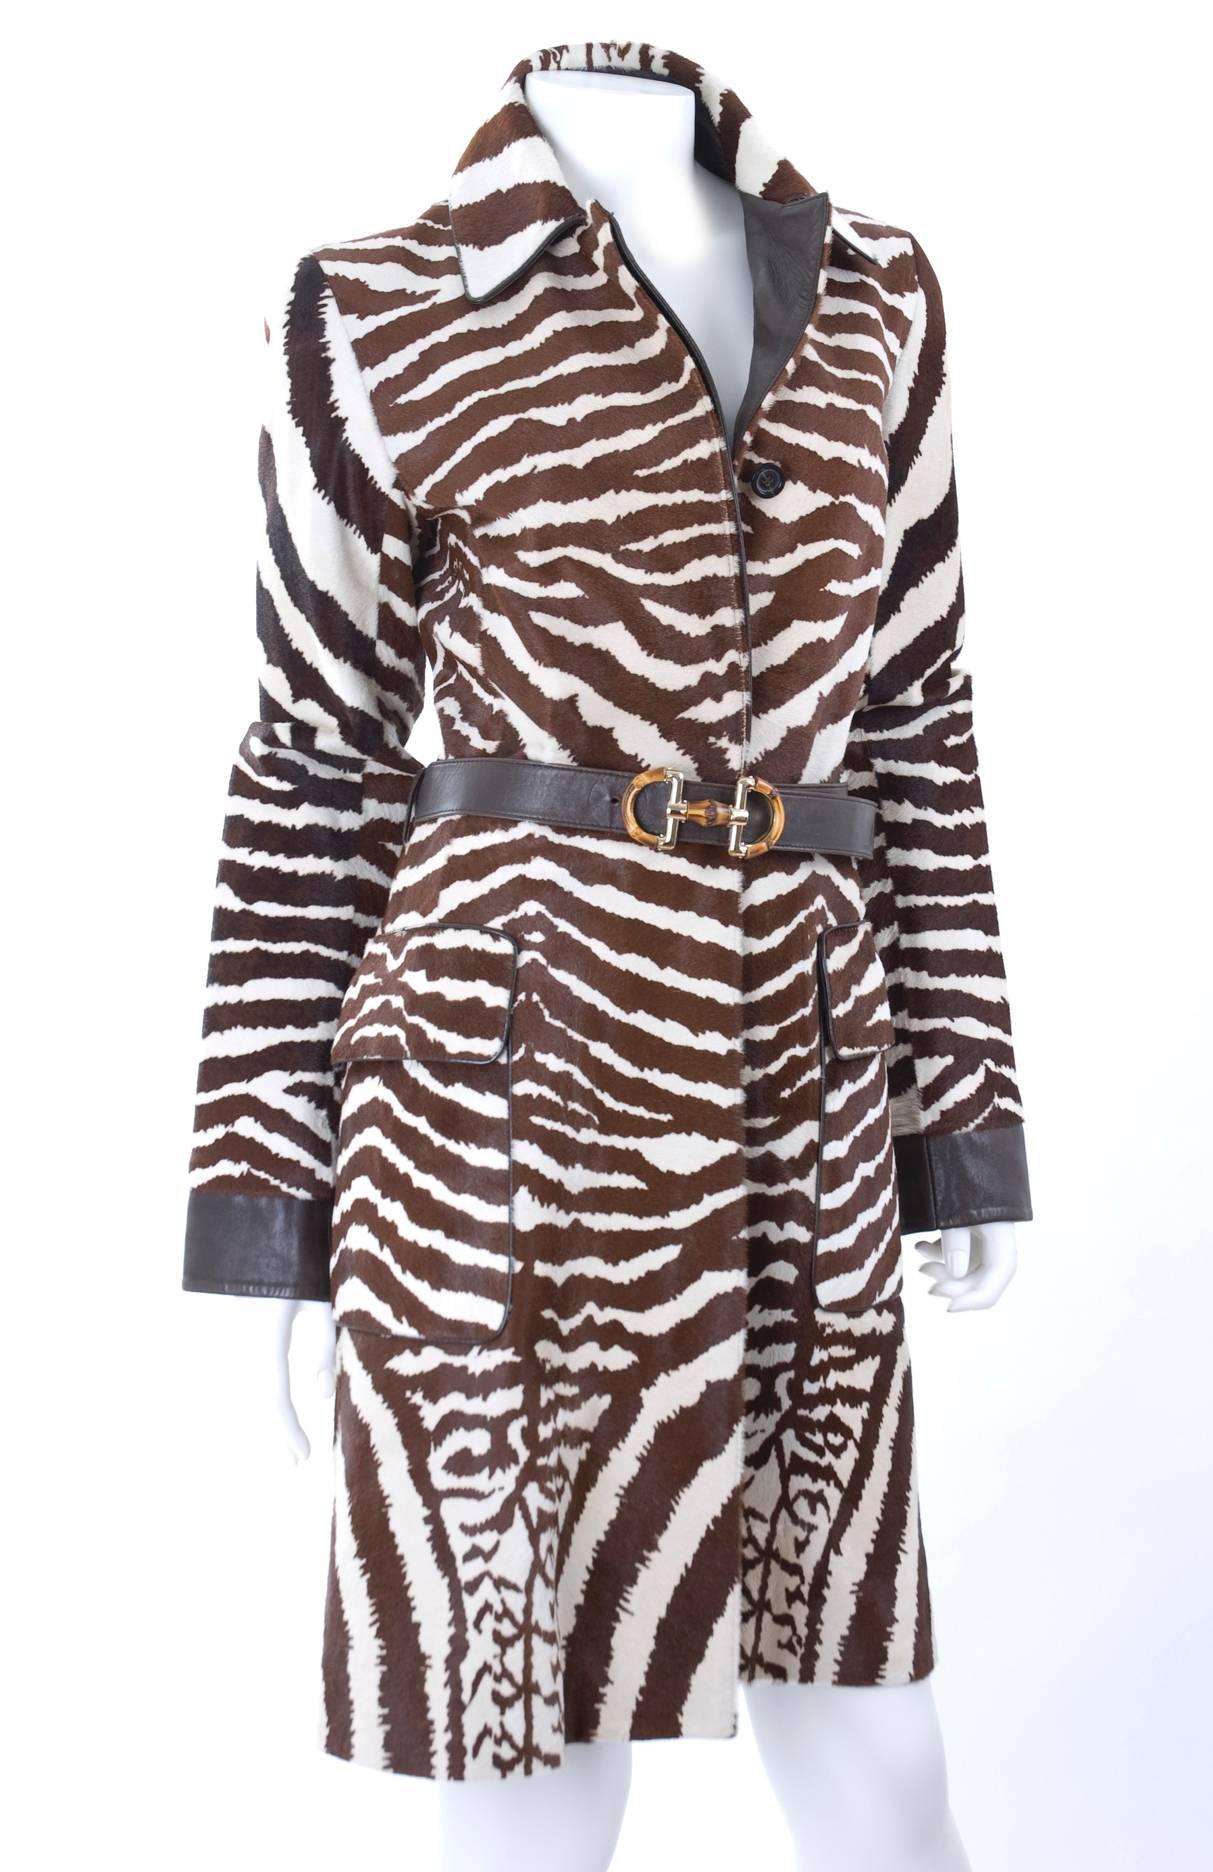 2007 Gucci zebra printed calf hair coat with brown leather trim and belt with bamboo buckle. 
Size 40 IT. - Fully lined.
Measurements: 
Length 38